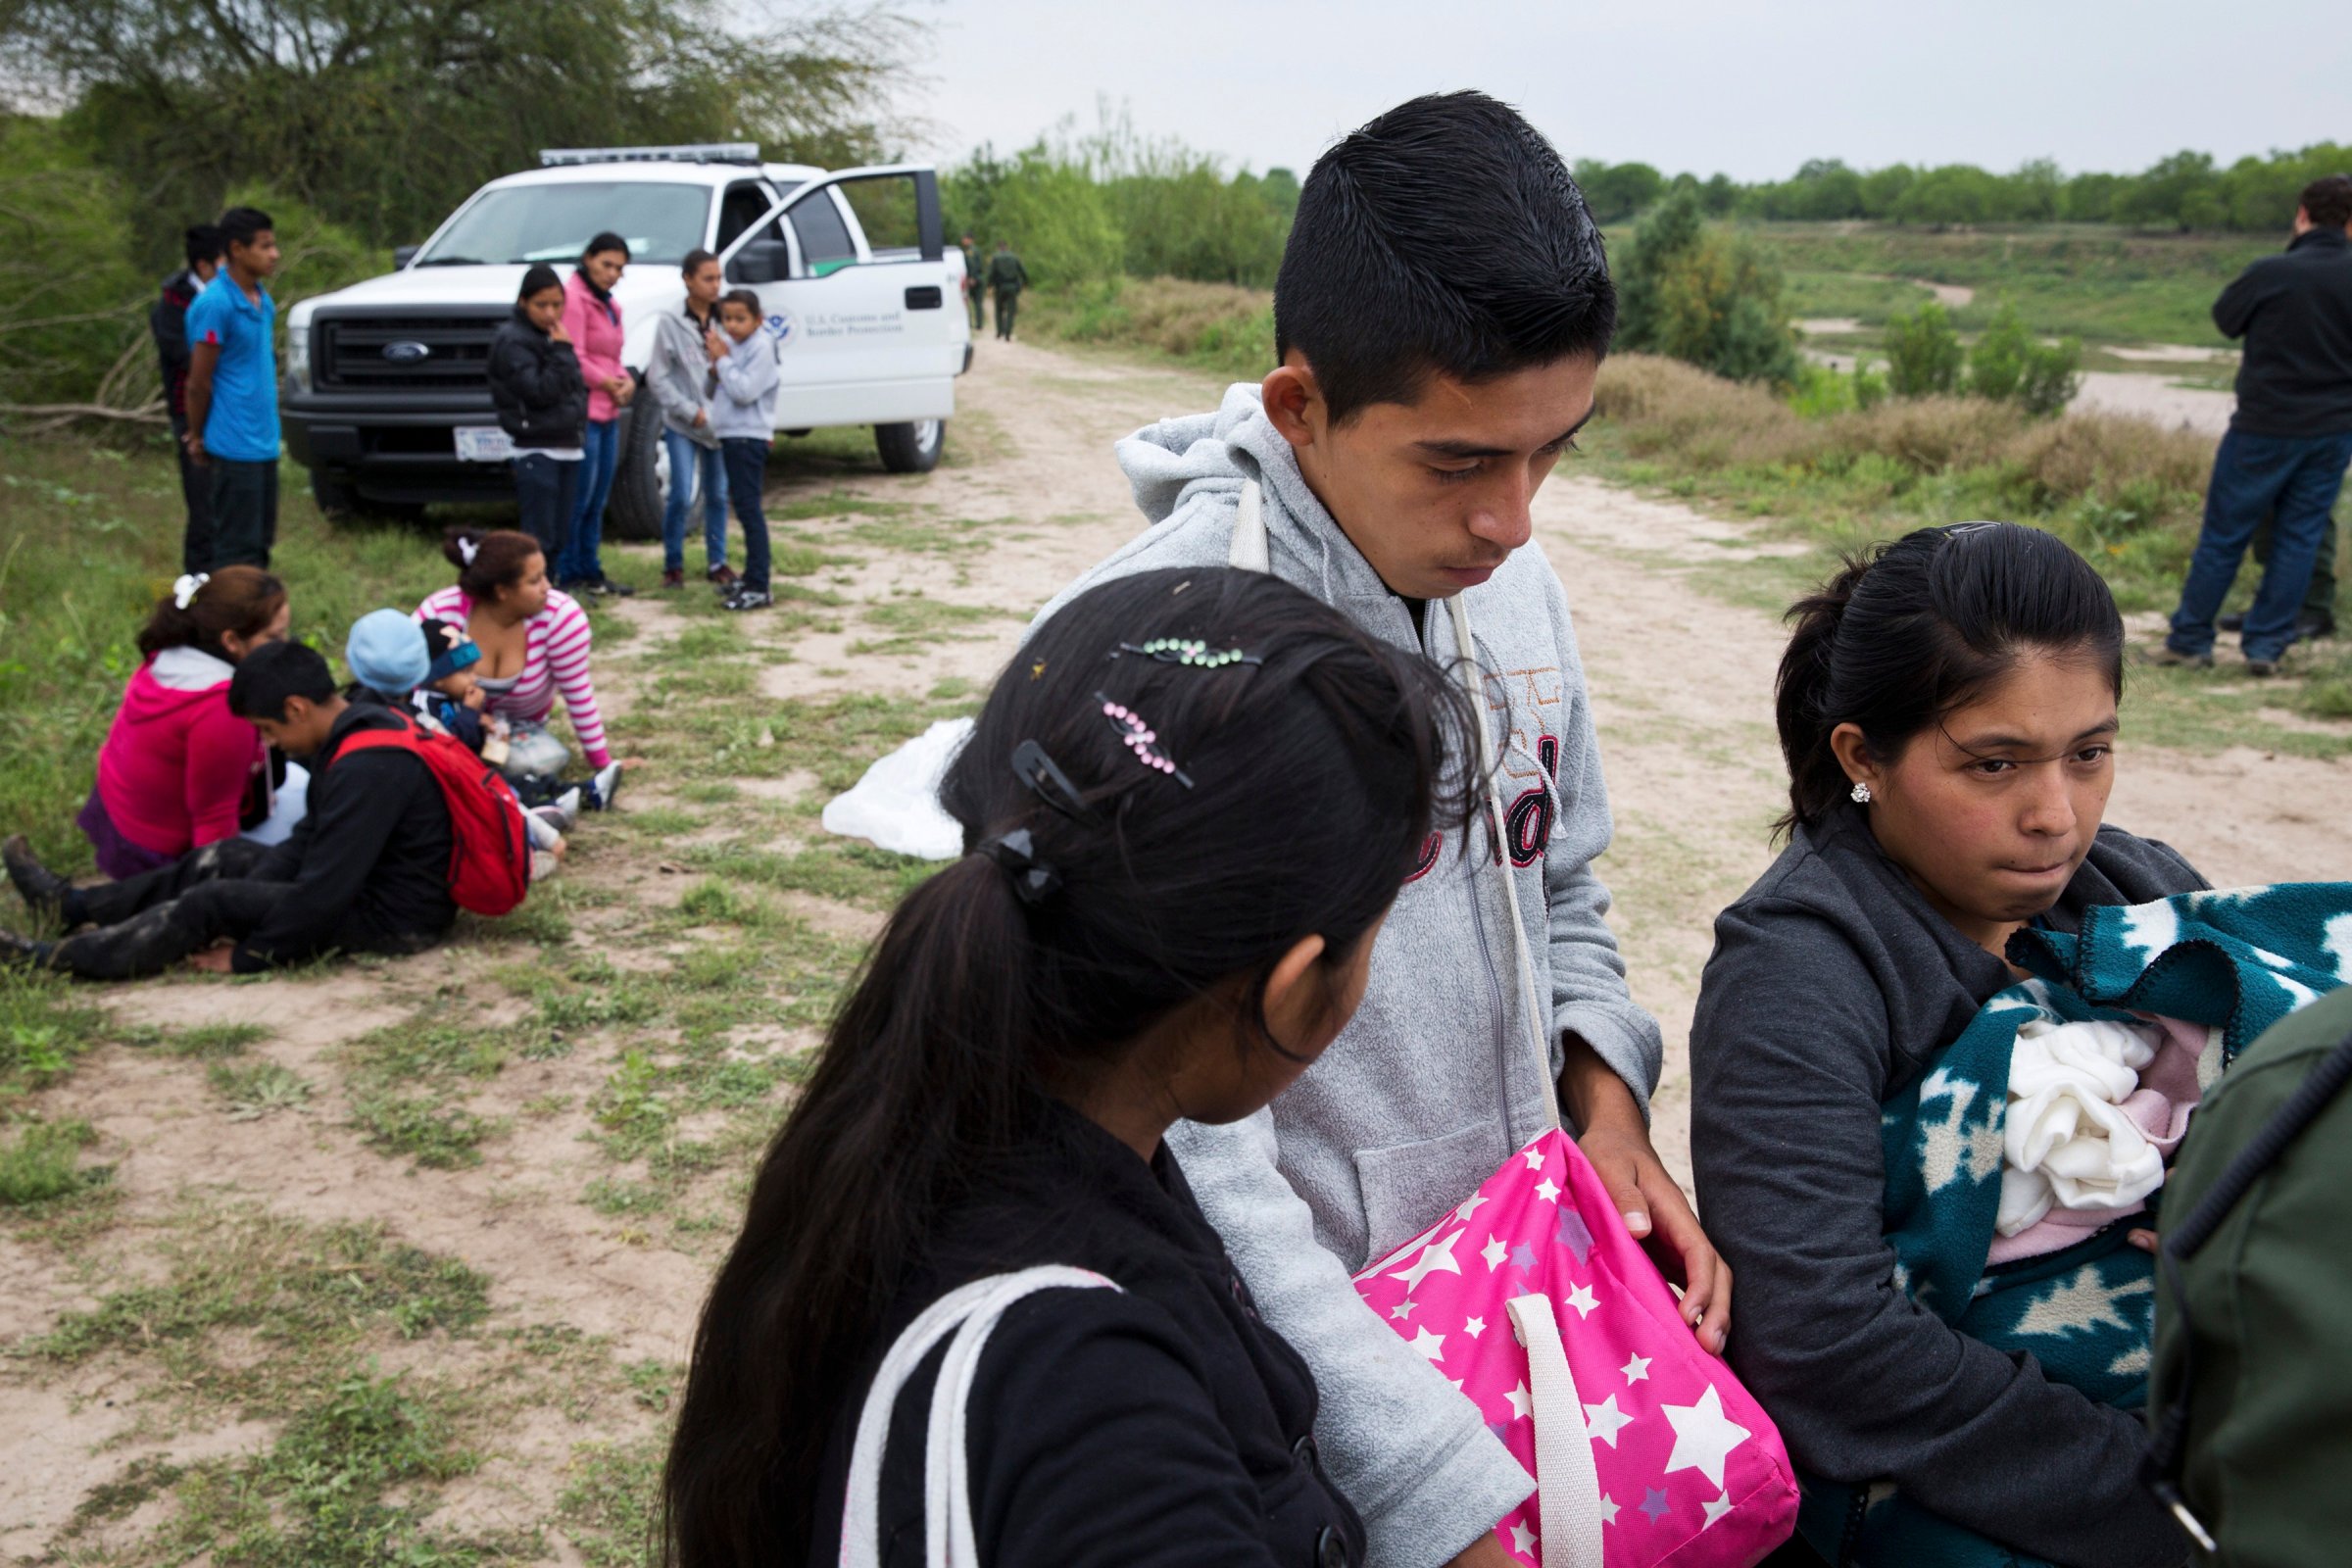 U.S. Border Patrol agents detain a group of young migrants from Honduras and Guatemala near the Anzalduas Dam.